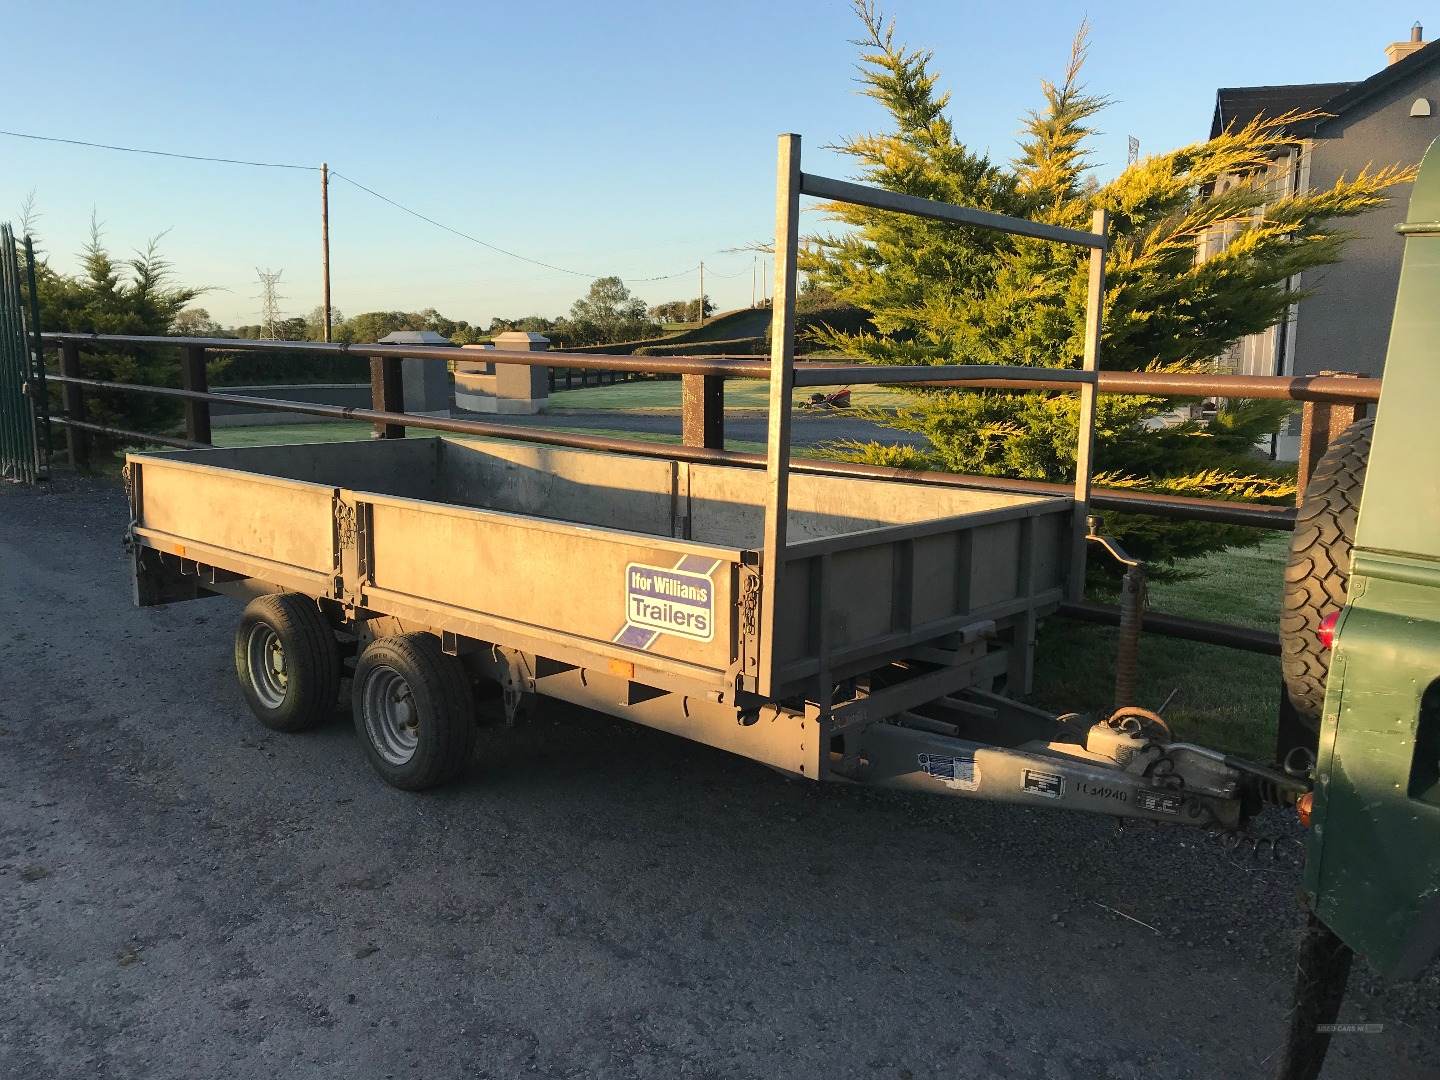 Ifor Williams Dropside Trailer 12X5'6 dropside trailer in Armagh